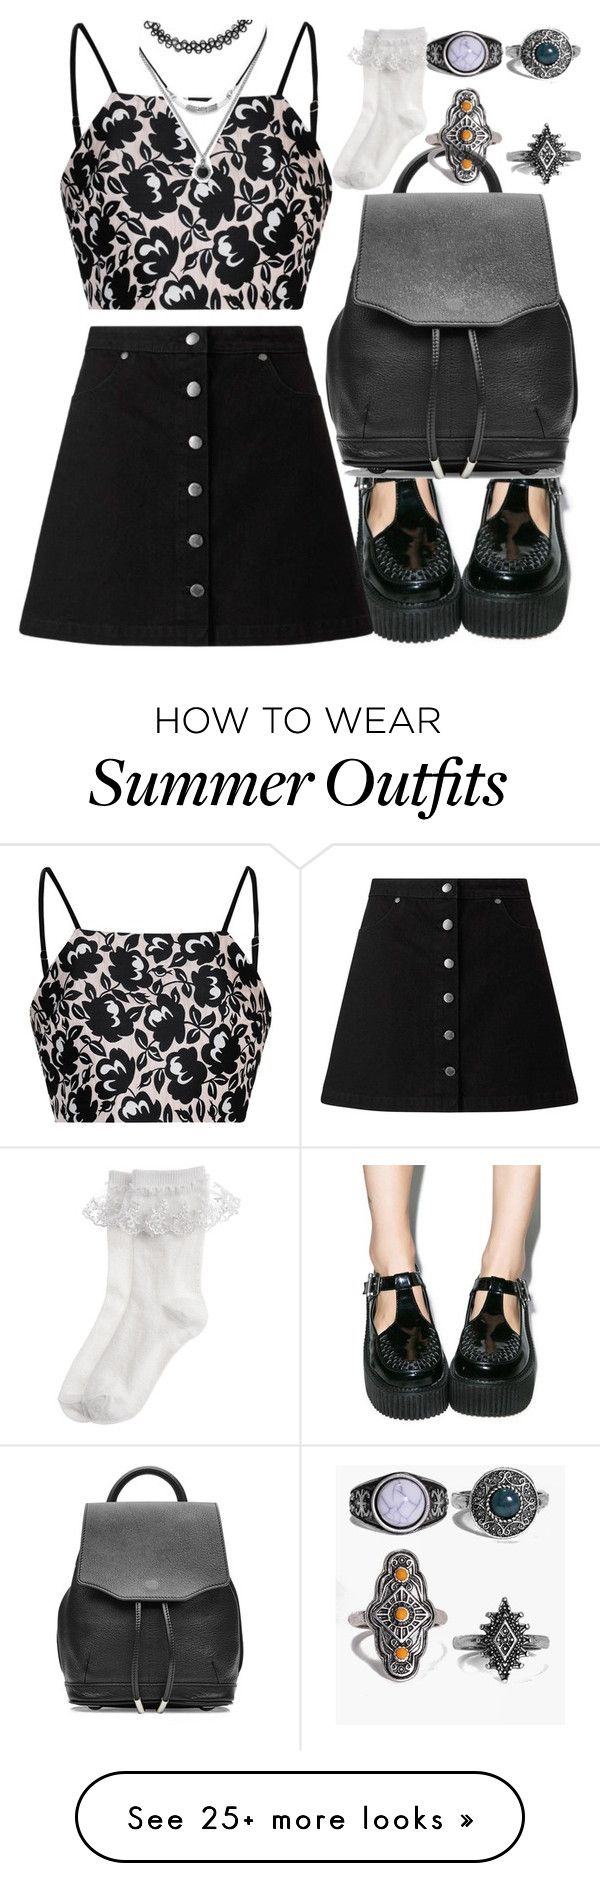 "summer outfit" by smirnova-varya on Polyvore featuring Demonia, Miss ...